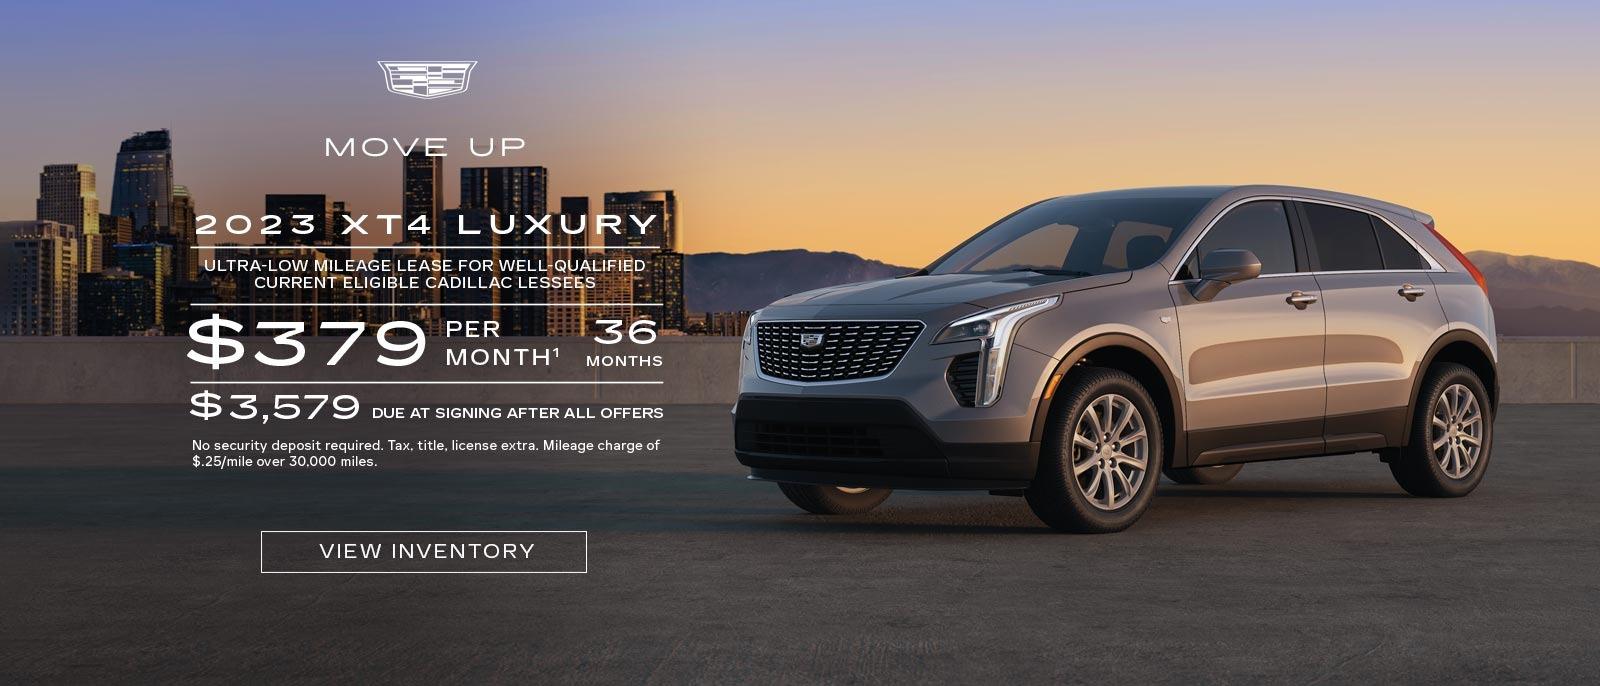 ULTRA-LOW MILEAGE LEASE FOR WELL-QUALIFIED CURRENT ELIGIBLE CADILLAC LESSEES
$379 PER MONTH¹ 36 MONTHS
$3,579 DUE AT SIGNING AFTER ALL OFFERS
No security deposit required. Tax, title, license extra. Mileage charge of $.25/mile over 30,000 miles.